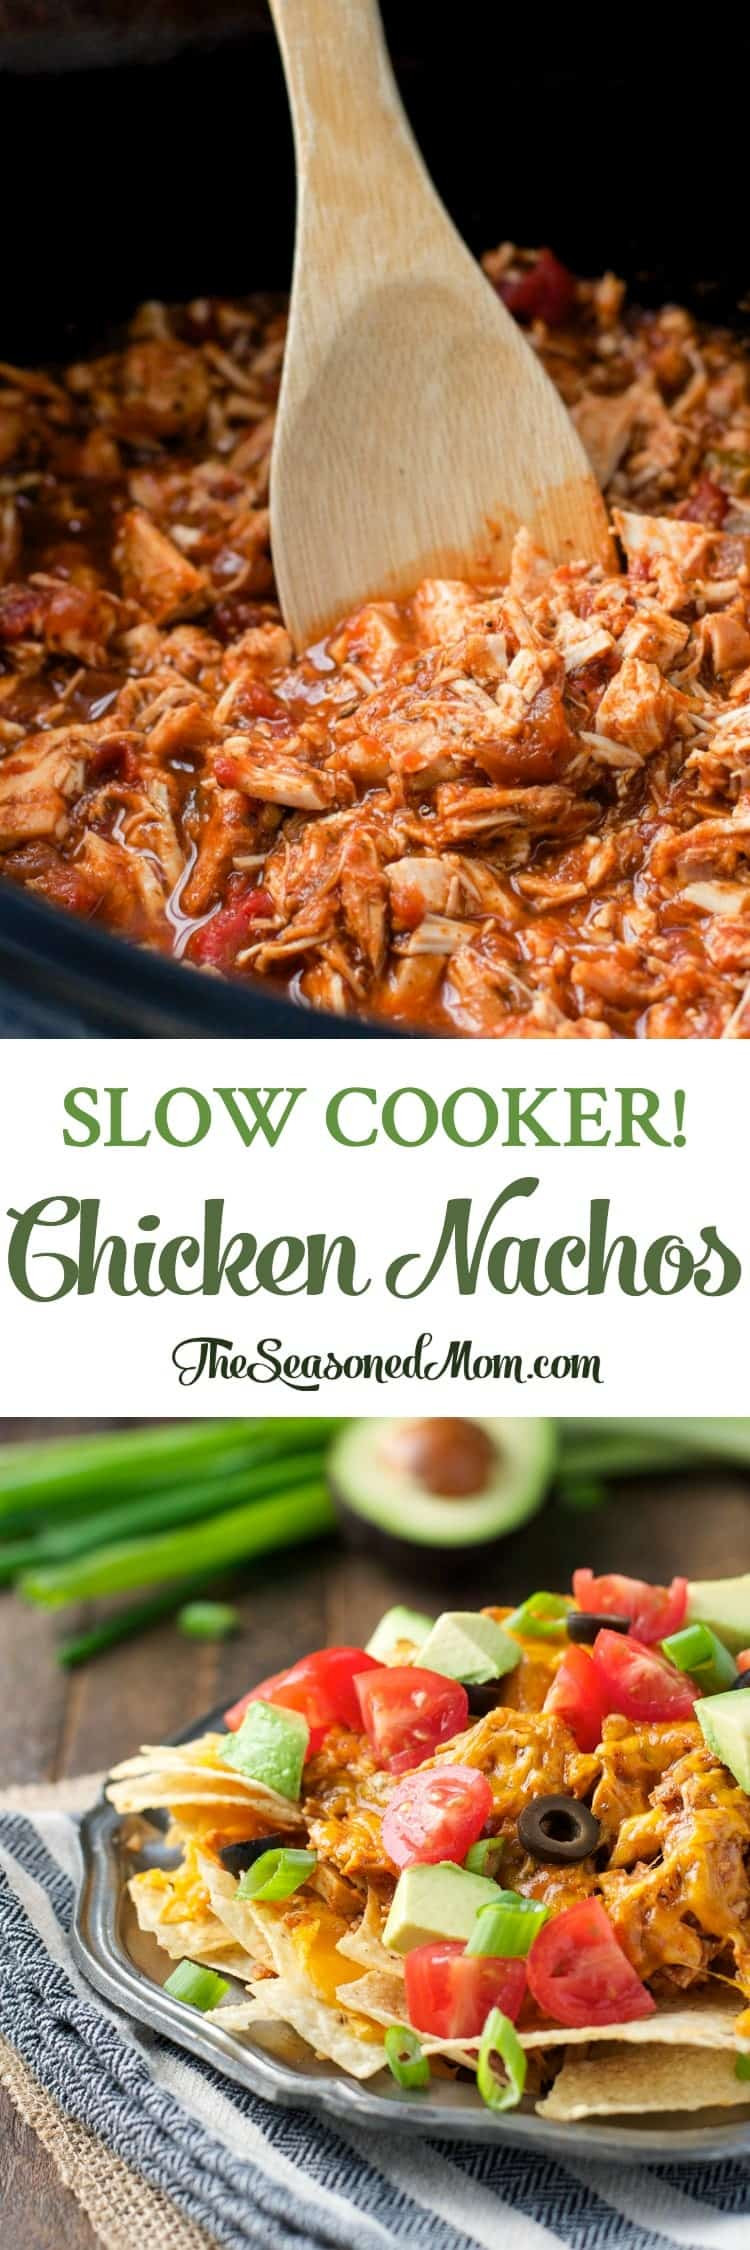 14 Easy Slow Cooker Appetizers
 Slow Cooker Chicken Nachos The Seasoned Mom